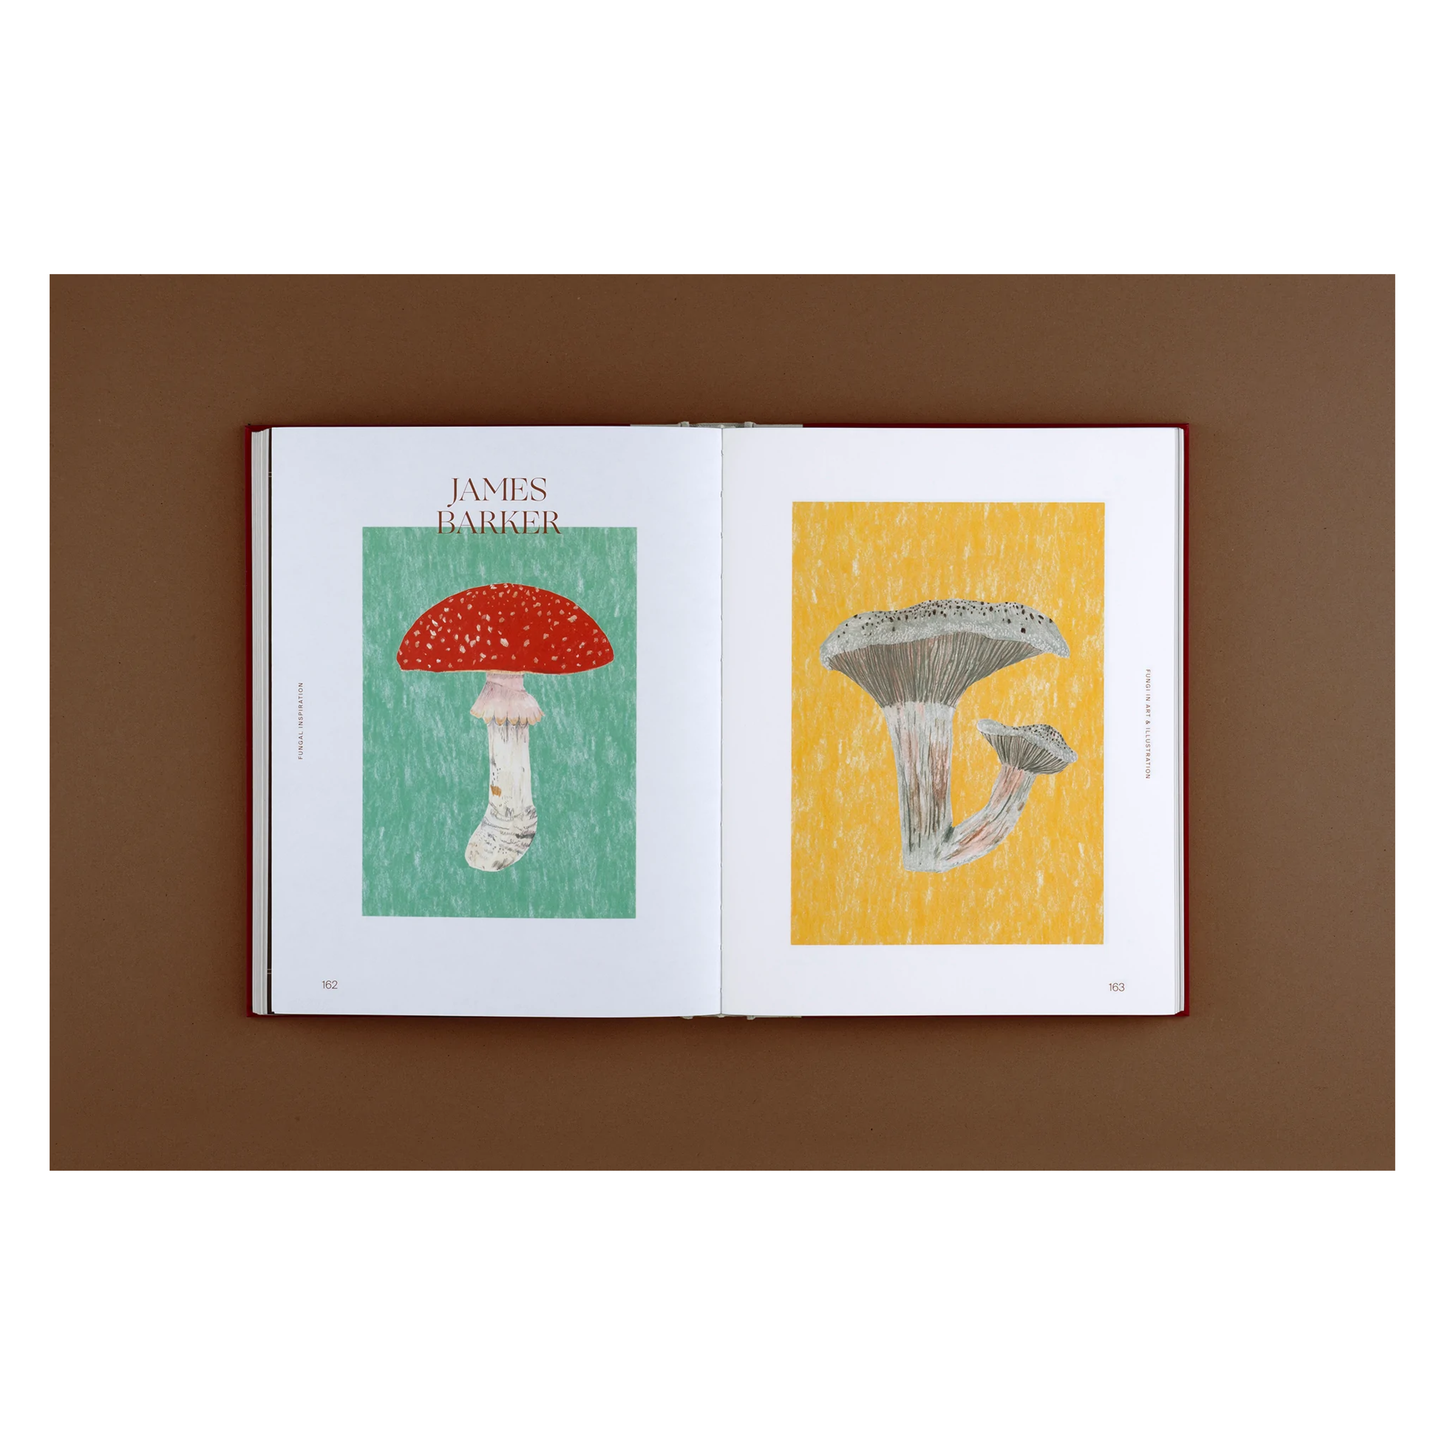 Fungal Inspiration - Art and design inspired by wild nature